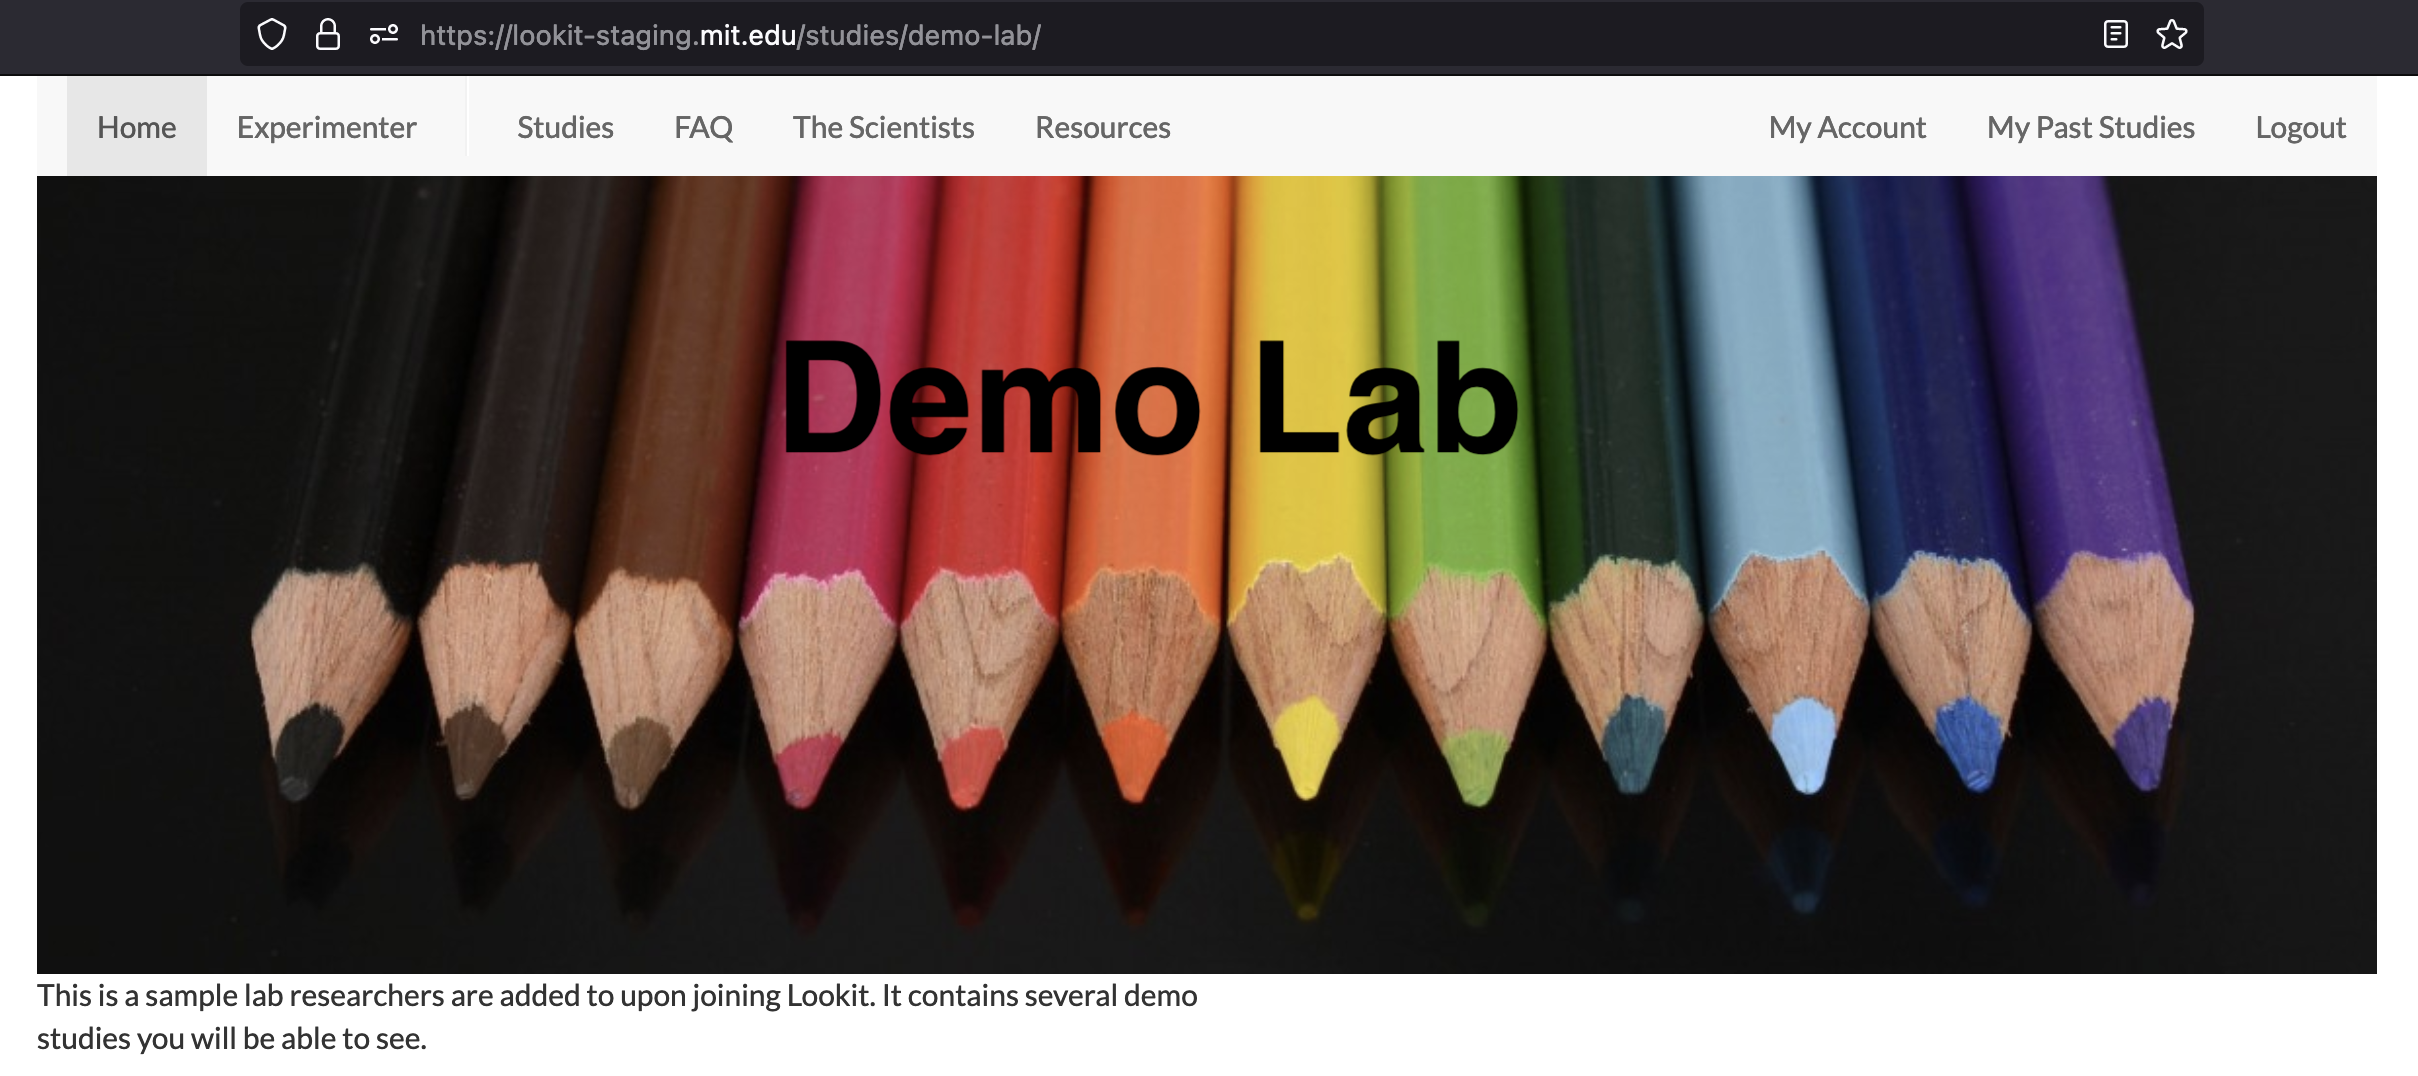 Demo Lab page with wide banner image